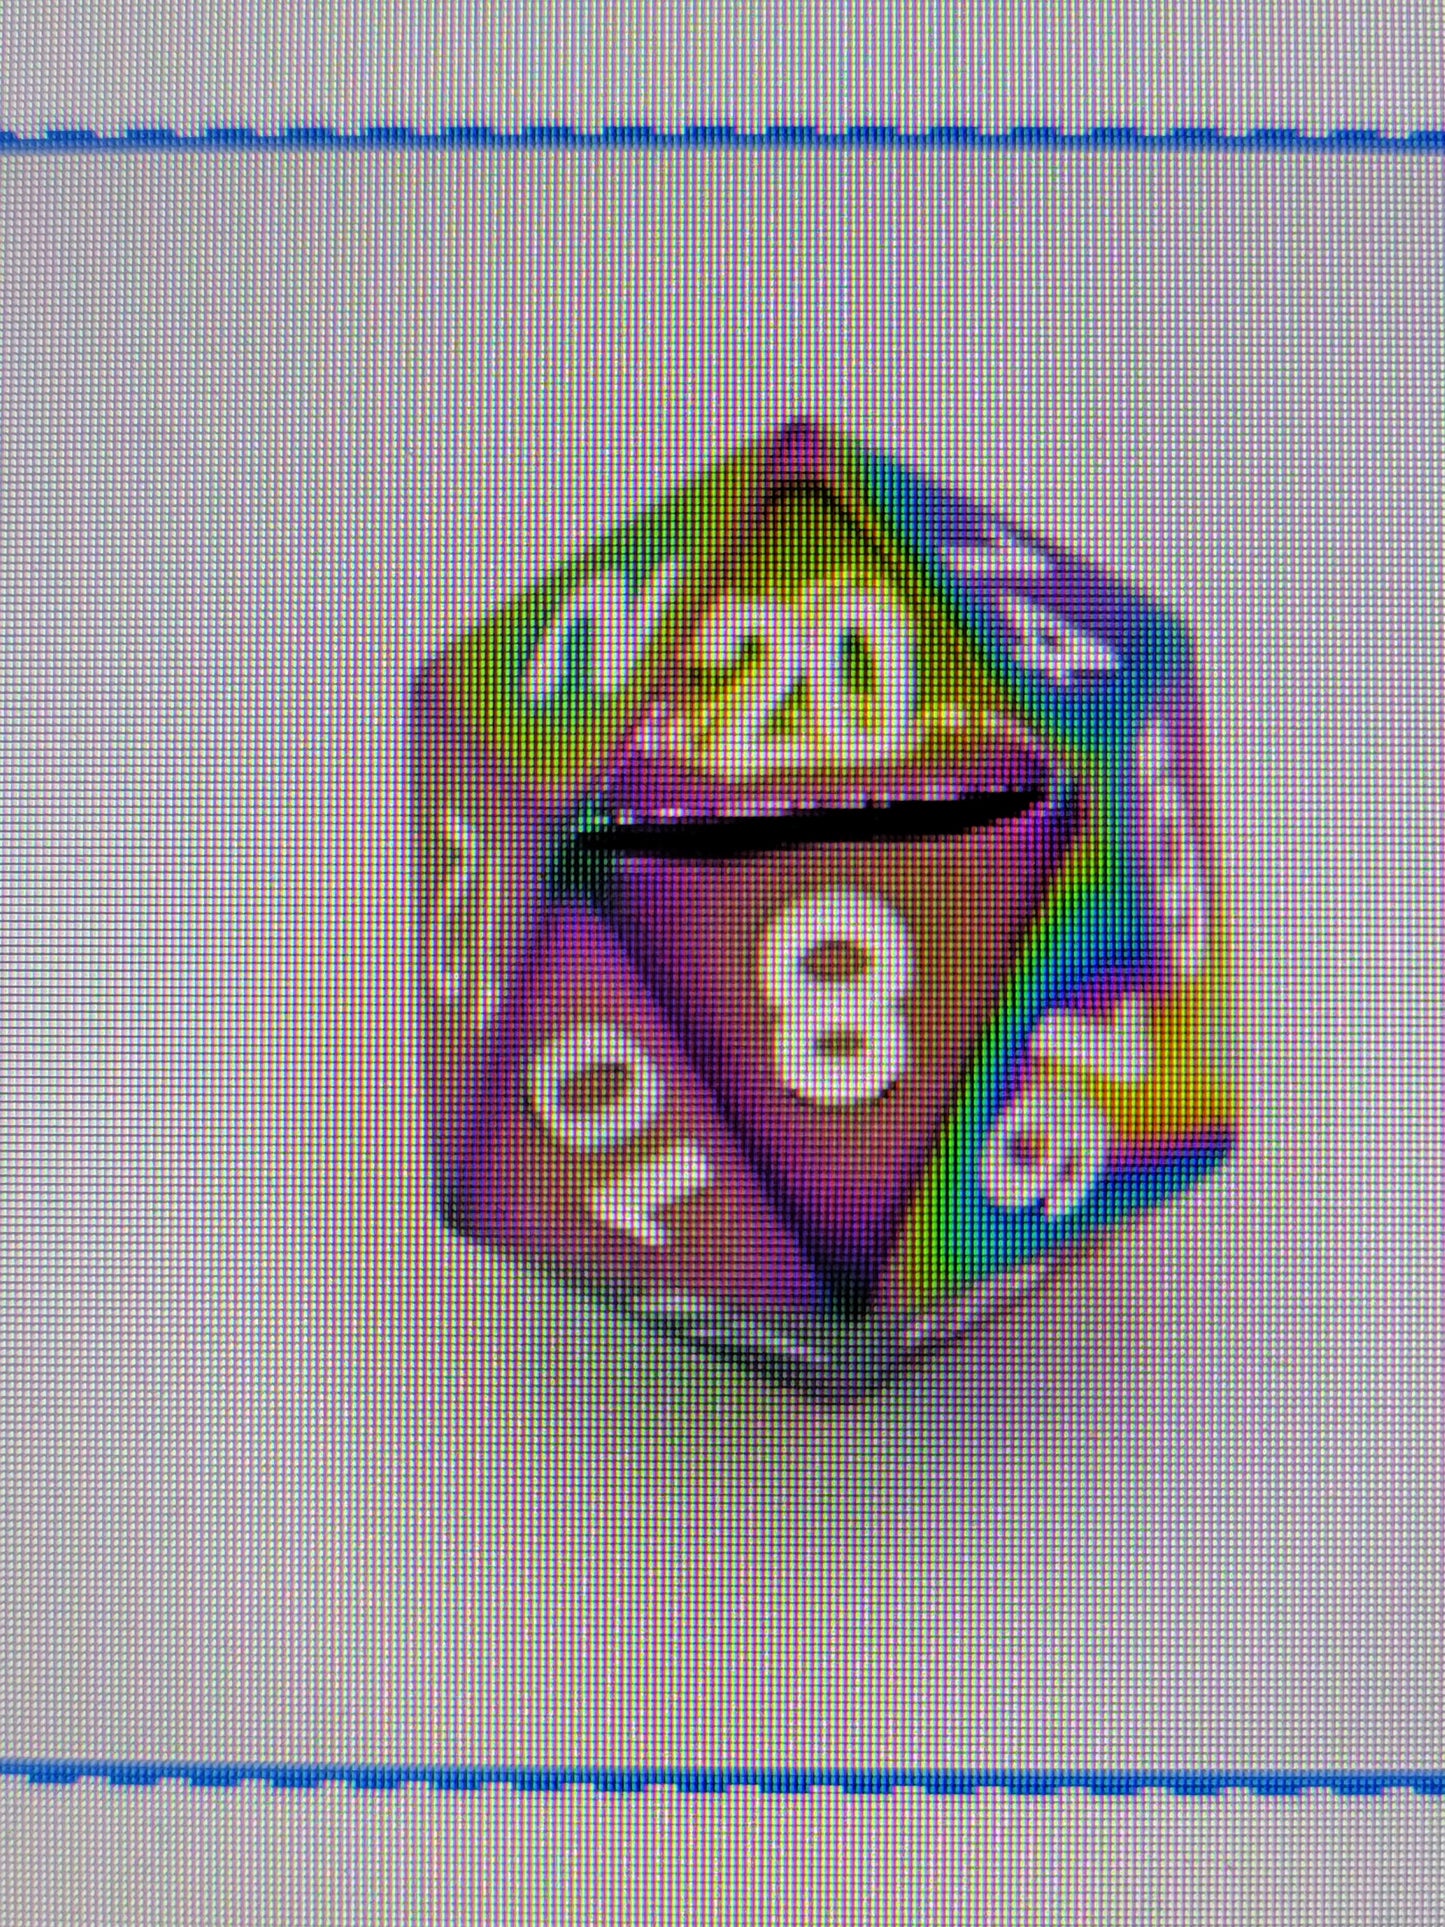 Single Metal D20 - Rainbow with White numbers